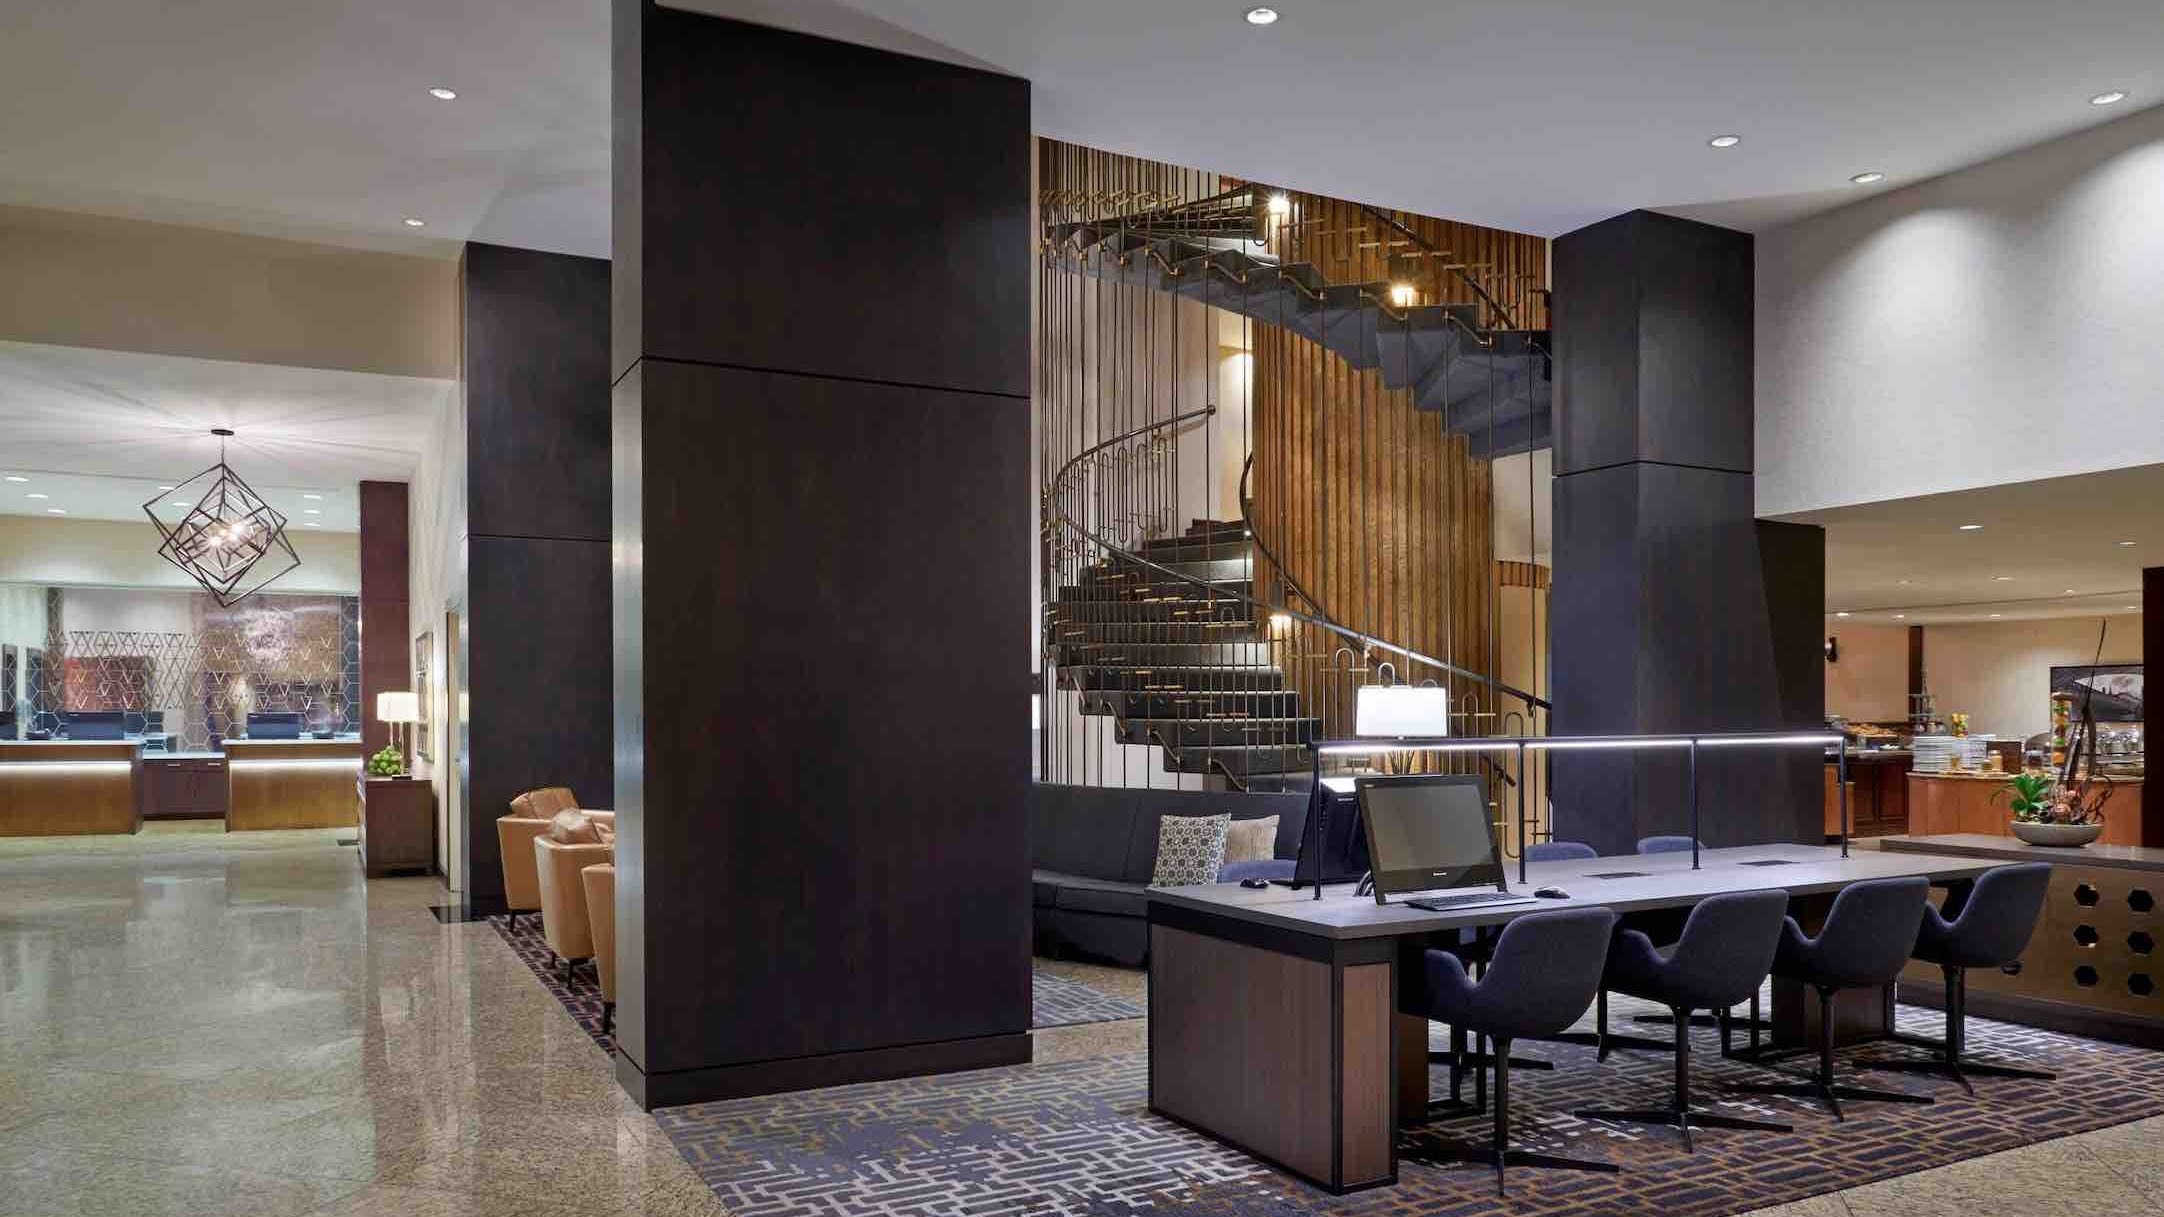 Modern designs and classy decor can be enjoyed throughout the Sheraton Ottawa Hotel (Photo courtesy Sheraton Ottawa Hotel)